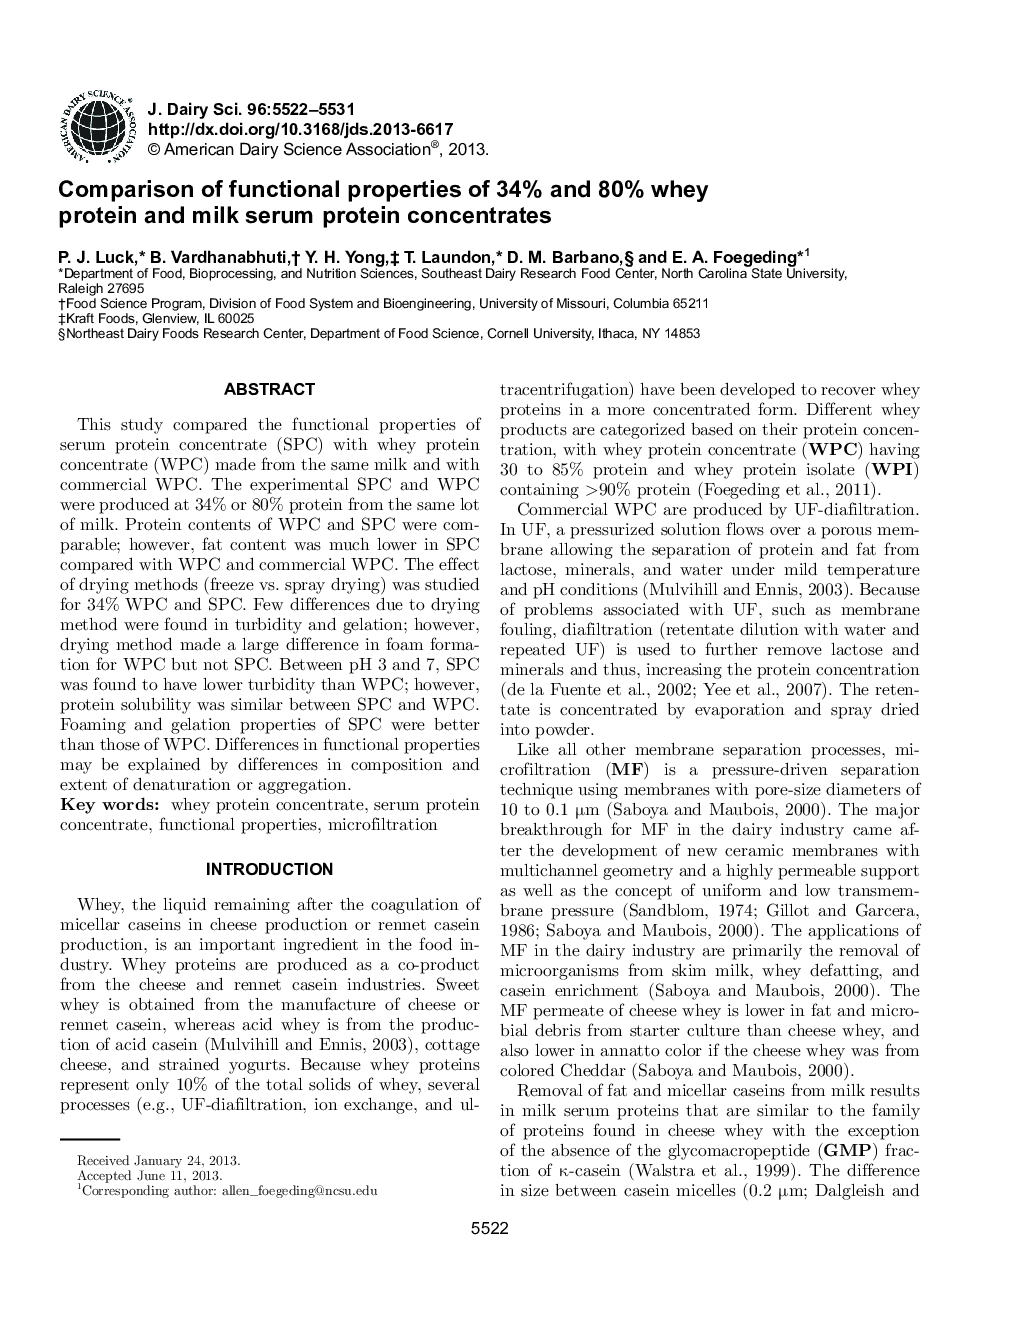 Comparison of functional properties of 34% and 80% whey protein and milk serum protein concentrates